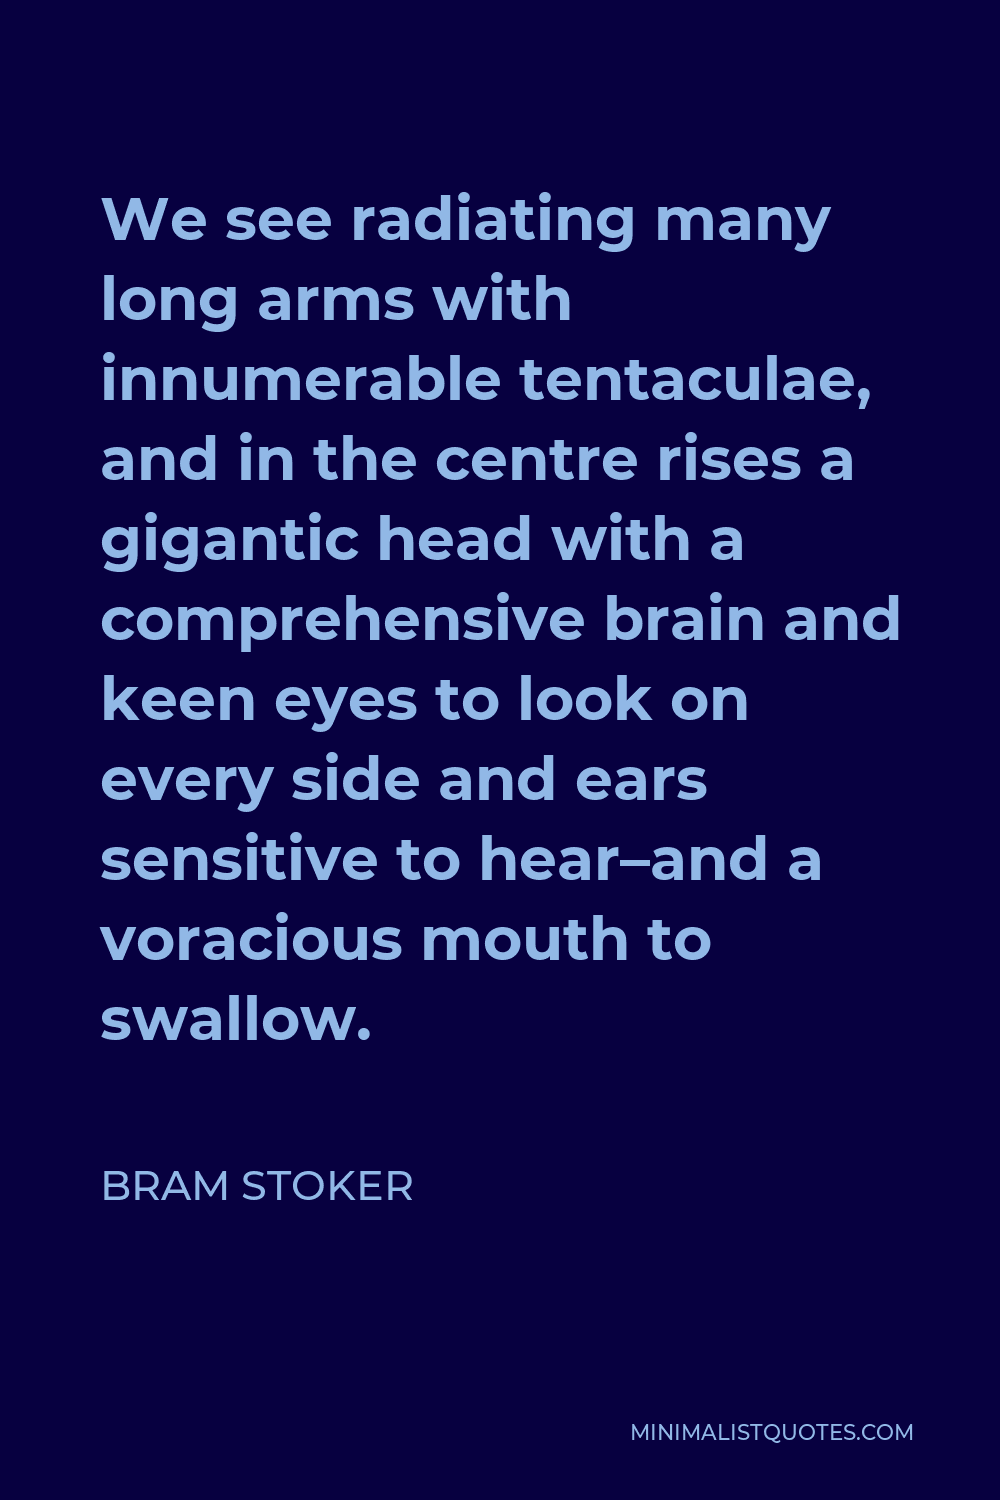 Bram Stoker Quote - We see radiating many long arms with innumerable tentaculae, and in the centre rises a gigantic head with a comprehensive brain and keen eyes to look on every side and ears sensitive to hear–and a voracious mouth to swallow.